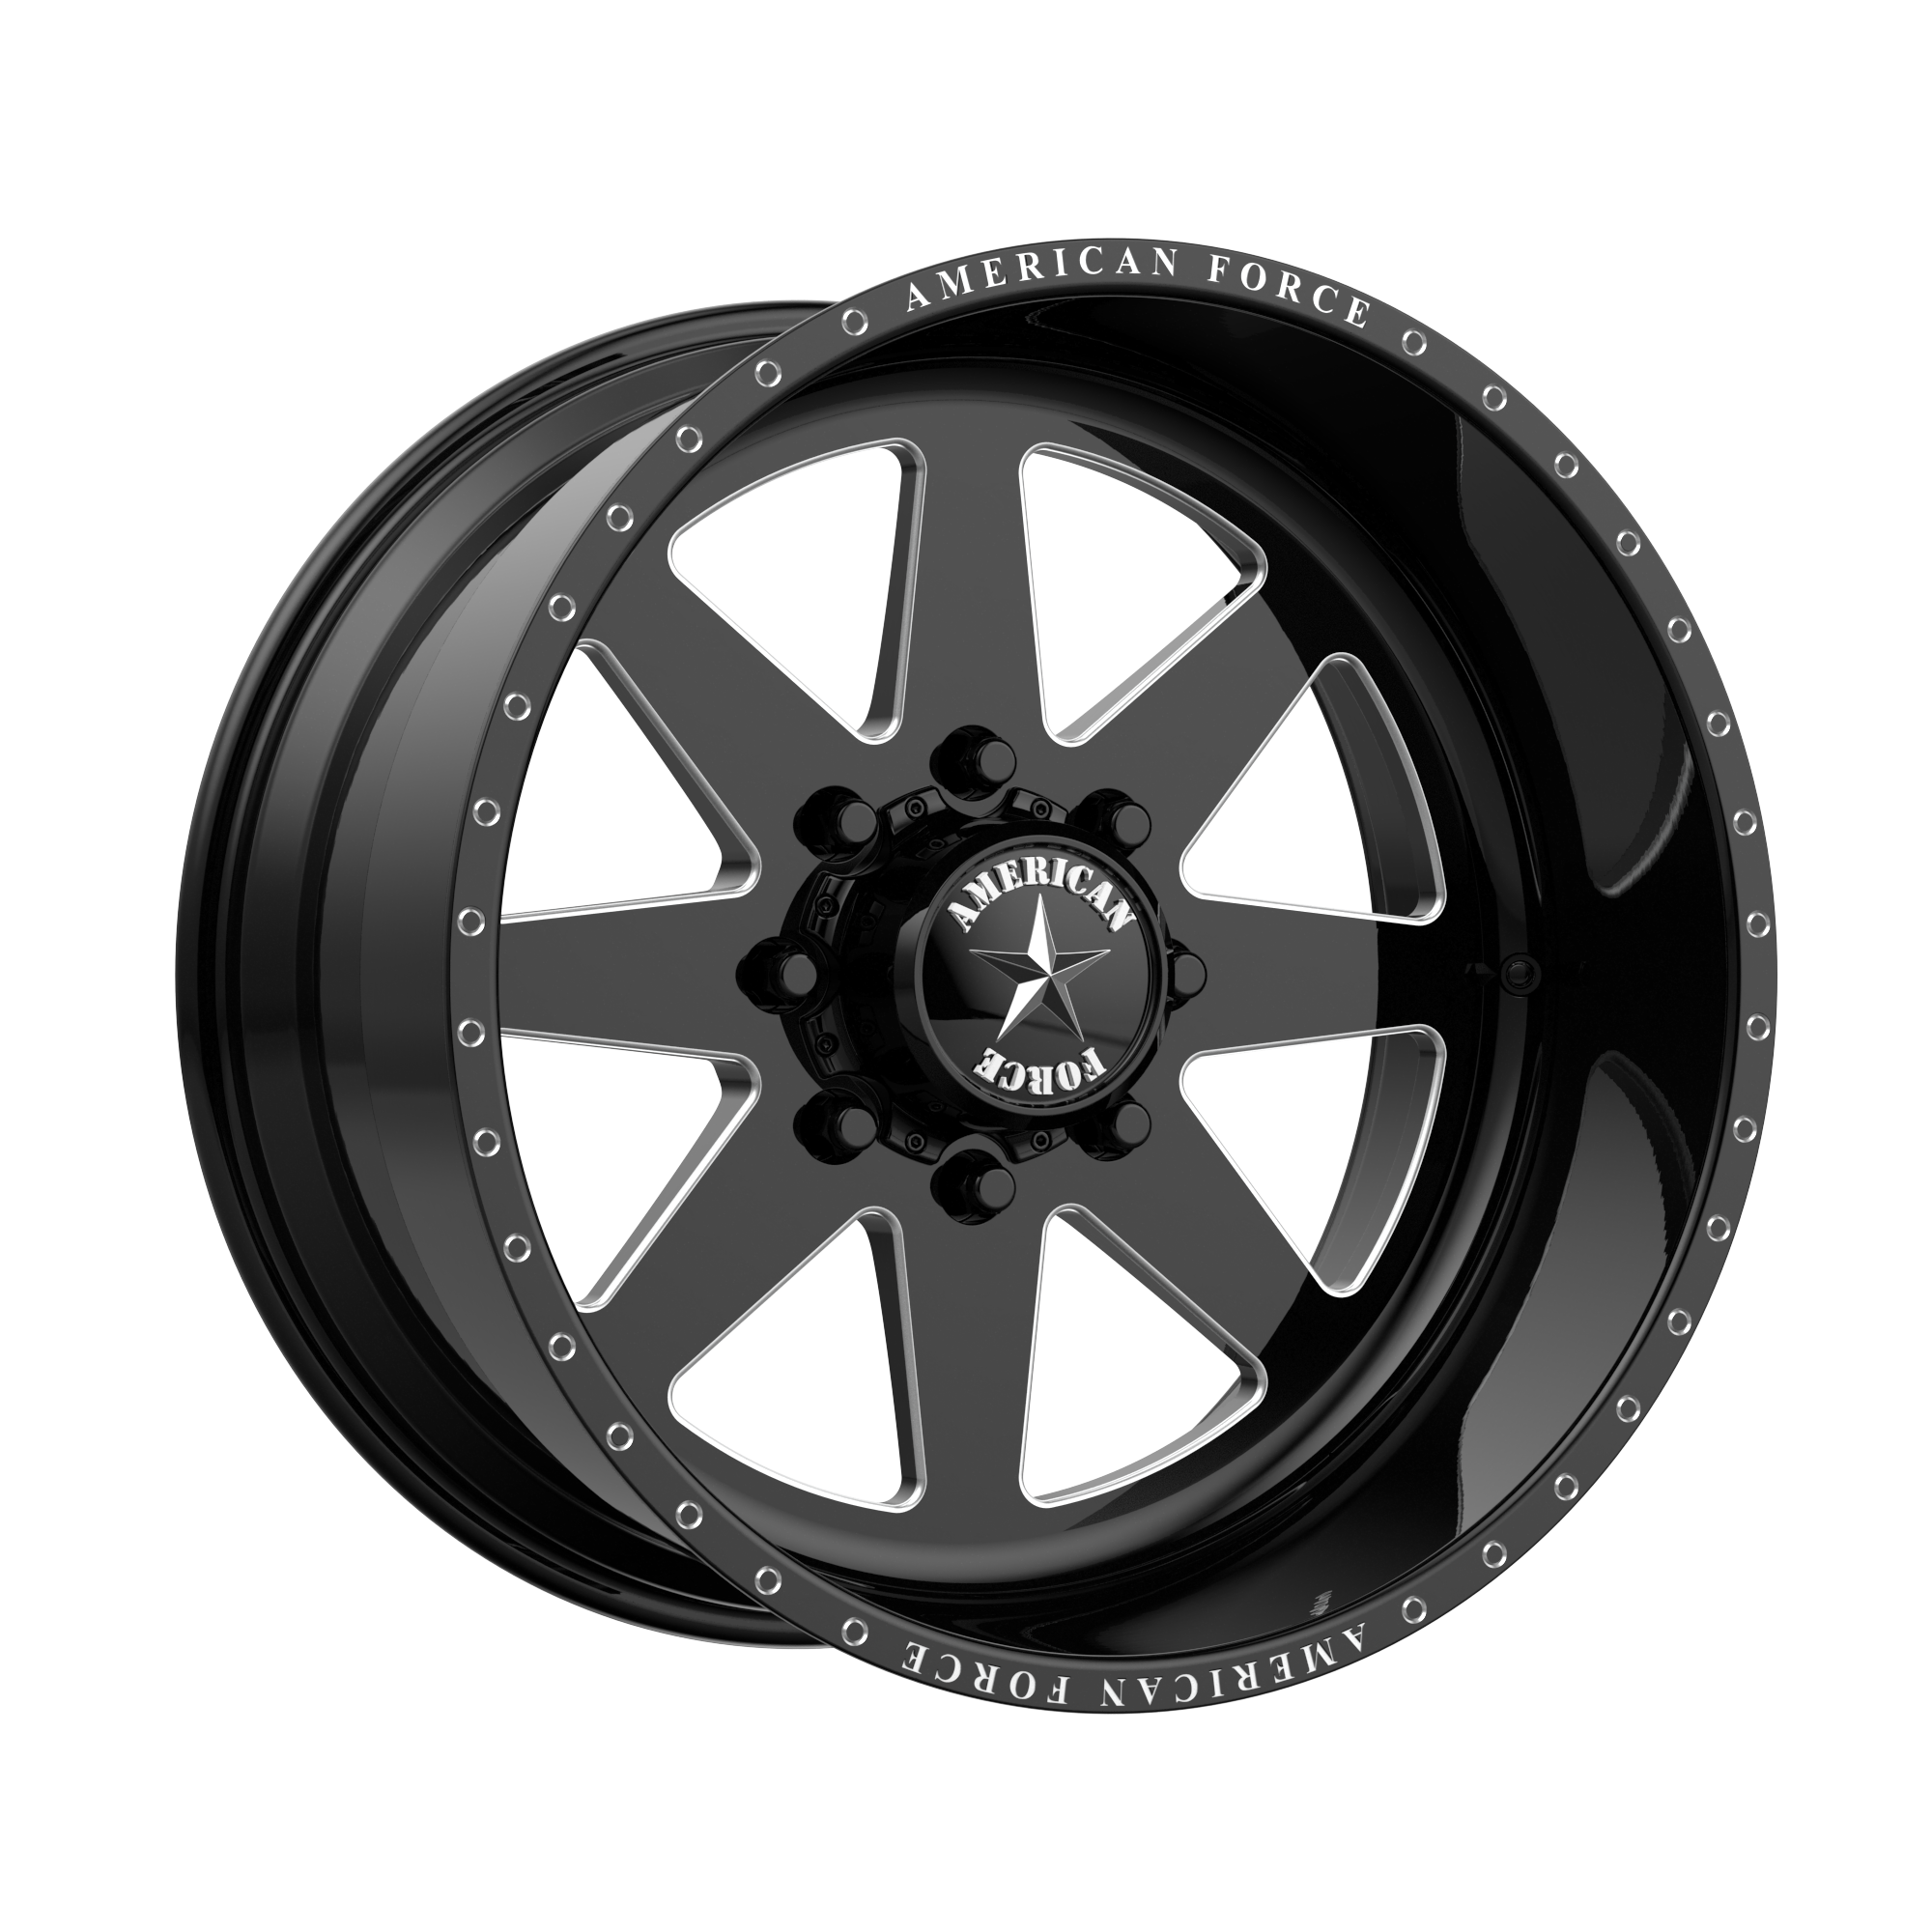 INDEPENDENCE SS 20x10 6x135.00 GLOSS BLACK MACHINED (-25 mm) - Tires and Engine Performance